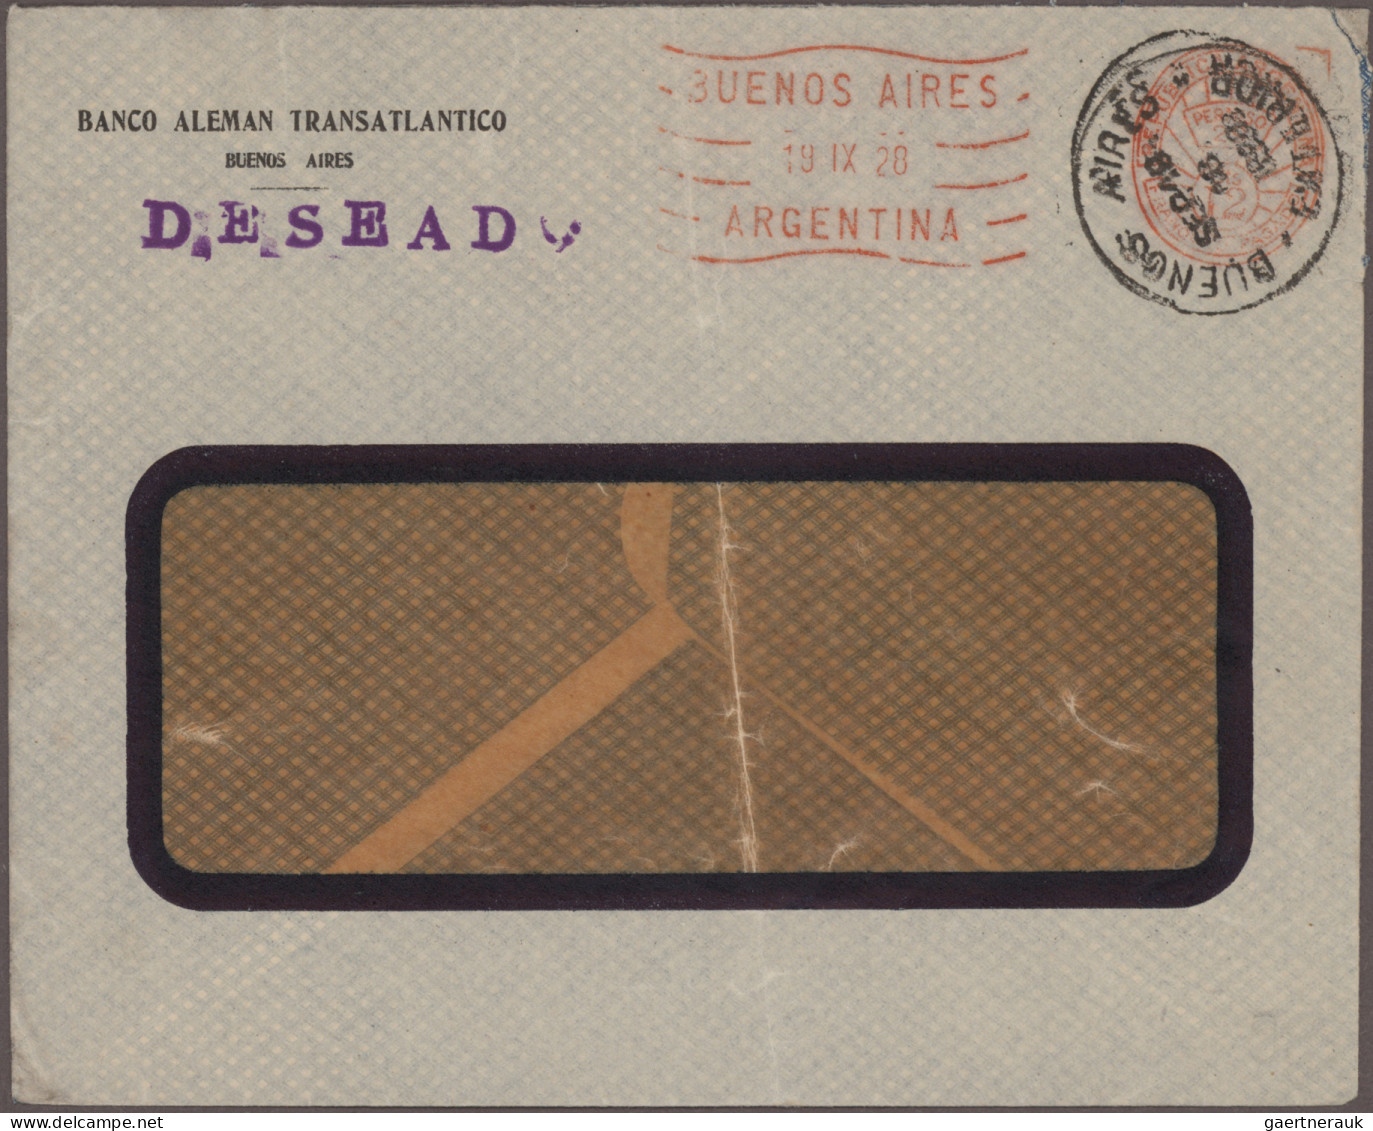 Argentina: 1928/1977, METER MARKS, assortment of apprx. 73 commercial covers mai